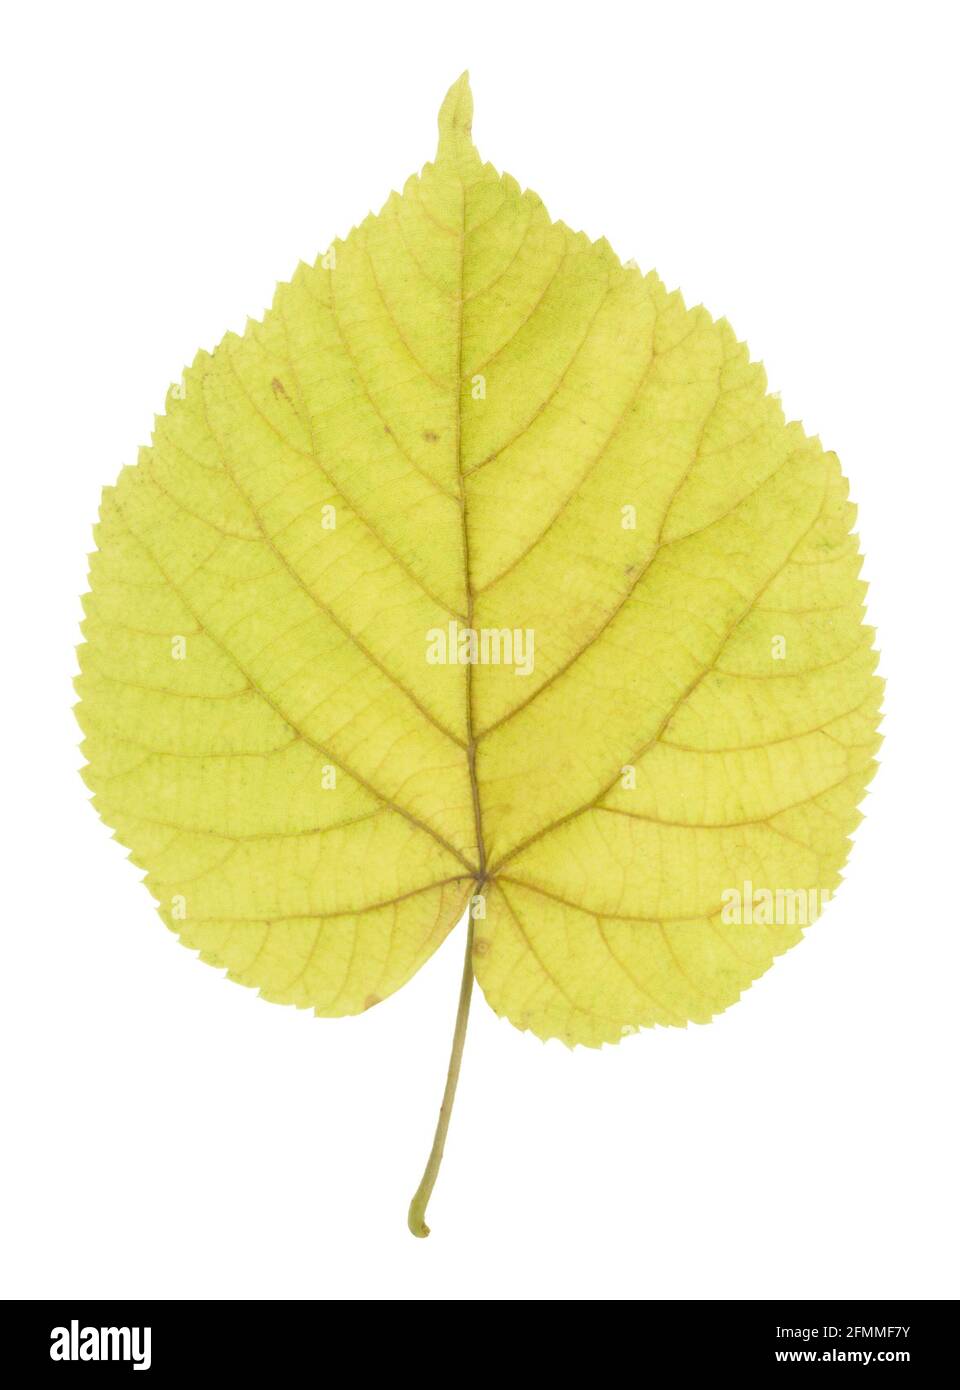 Small-leaved lime Tilia, chordata leaf in autumn isolated on white background Stock Photo